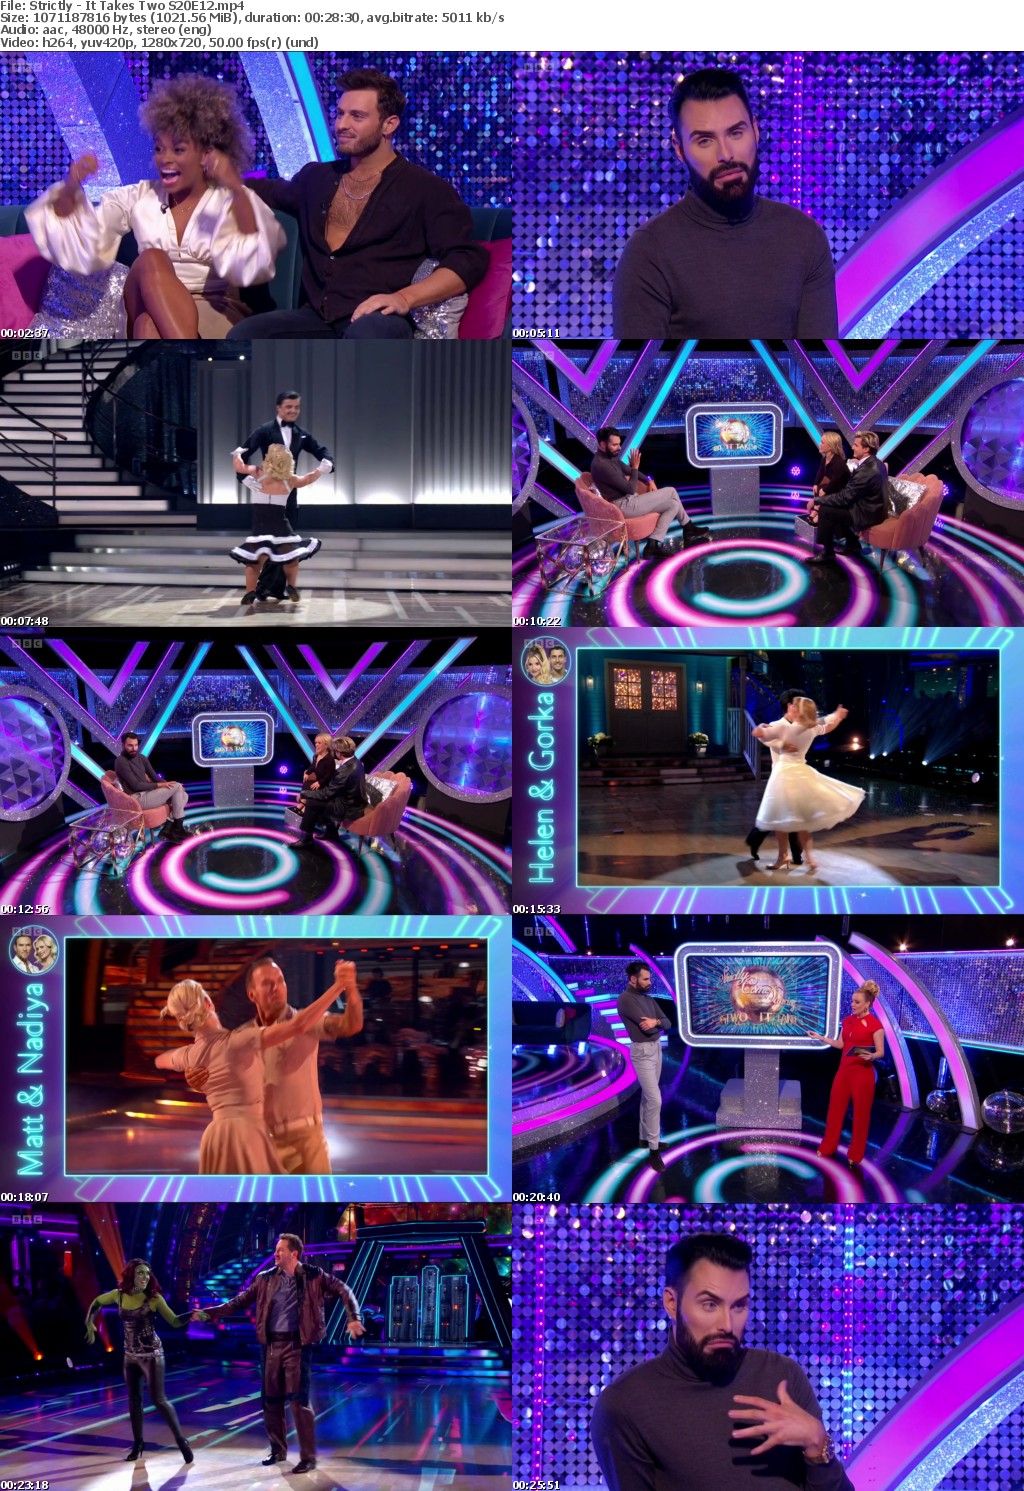 Strictly - It Takes Two S20E12 (1280x720p HD, 50fps, soft Eng subs)